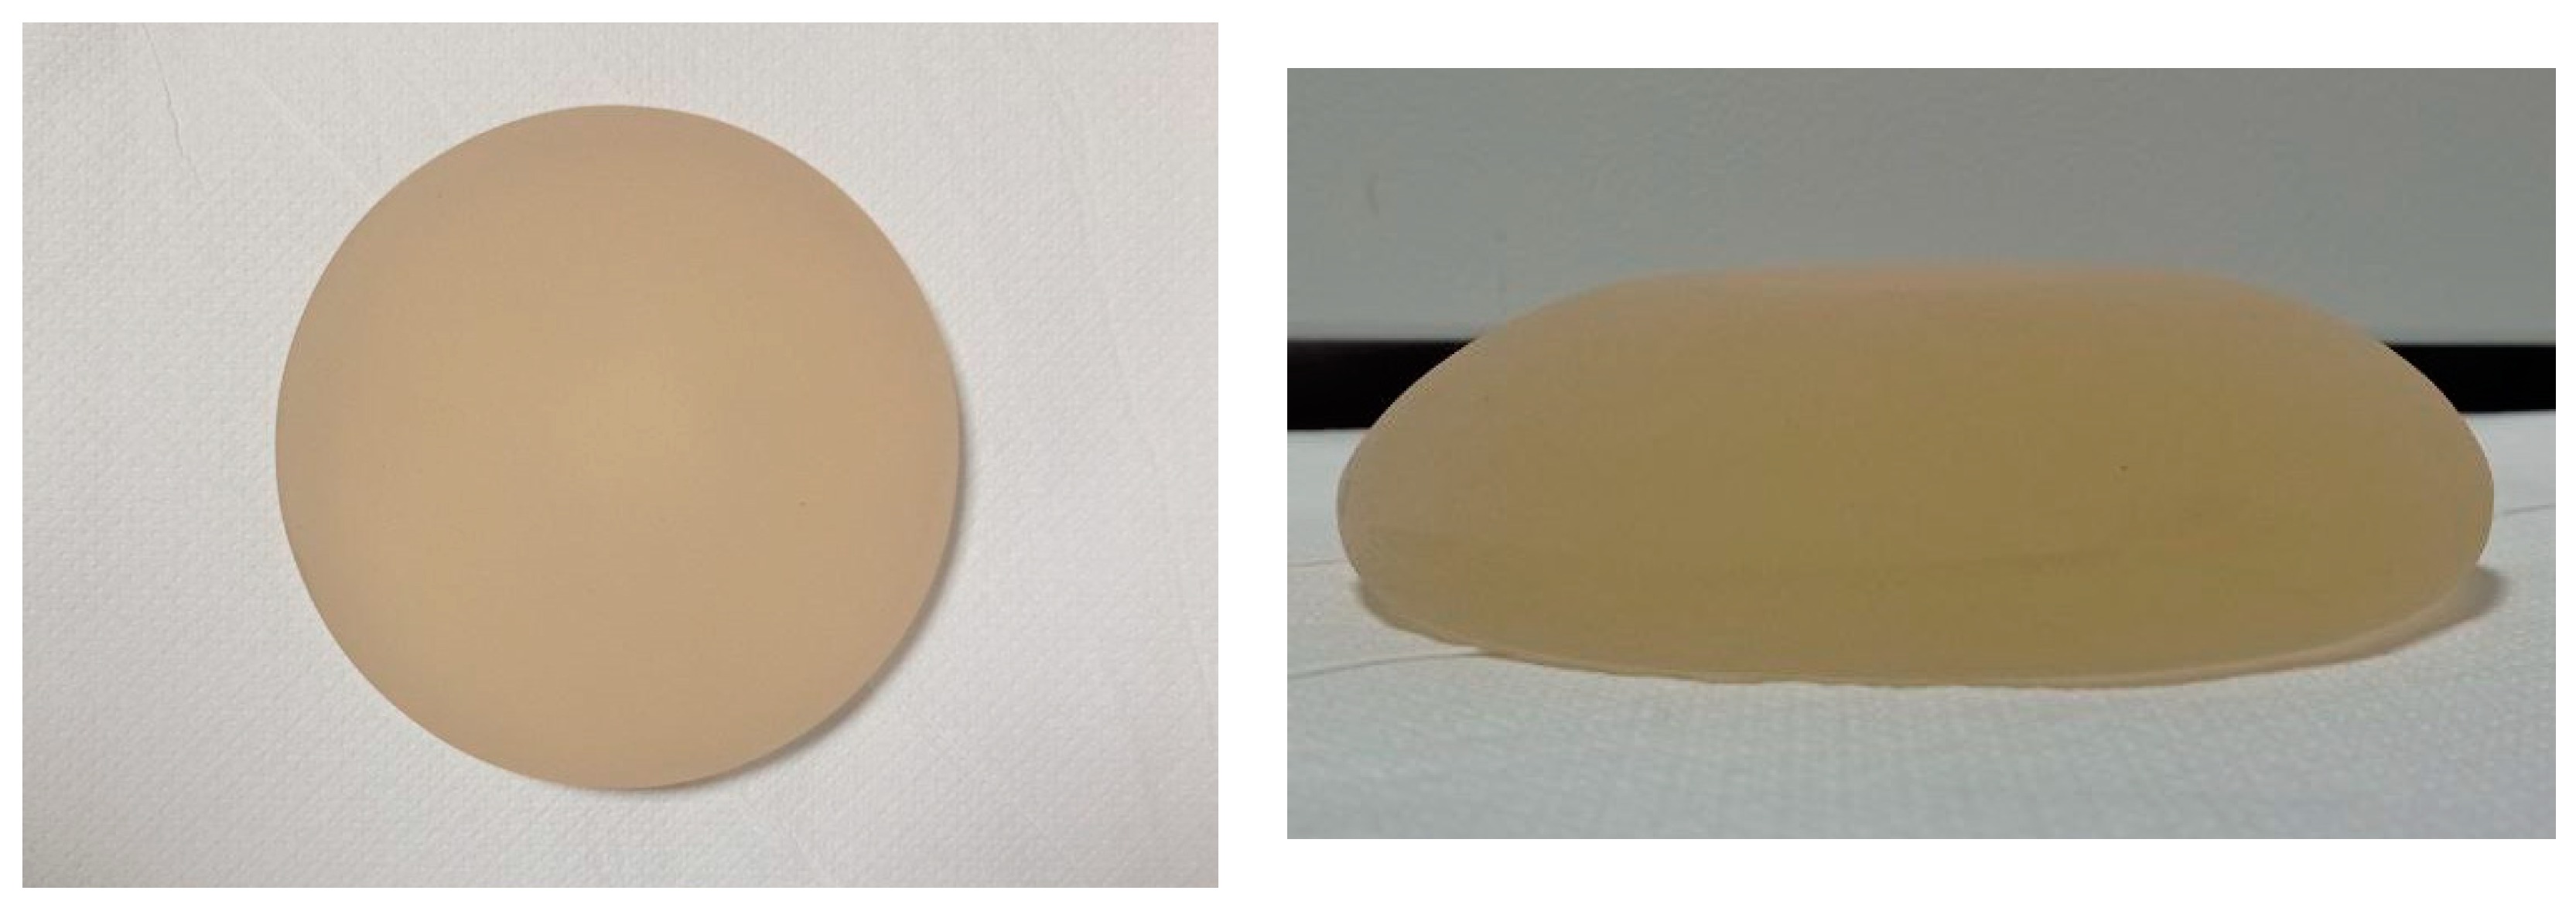 Silicone breast implant  Description, Uses, & Safety Issues